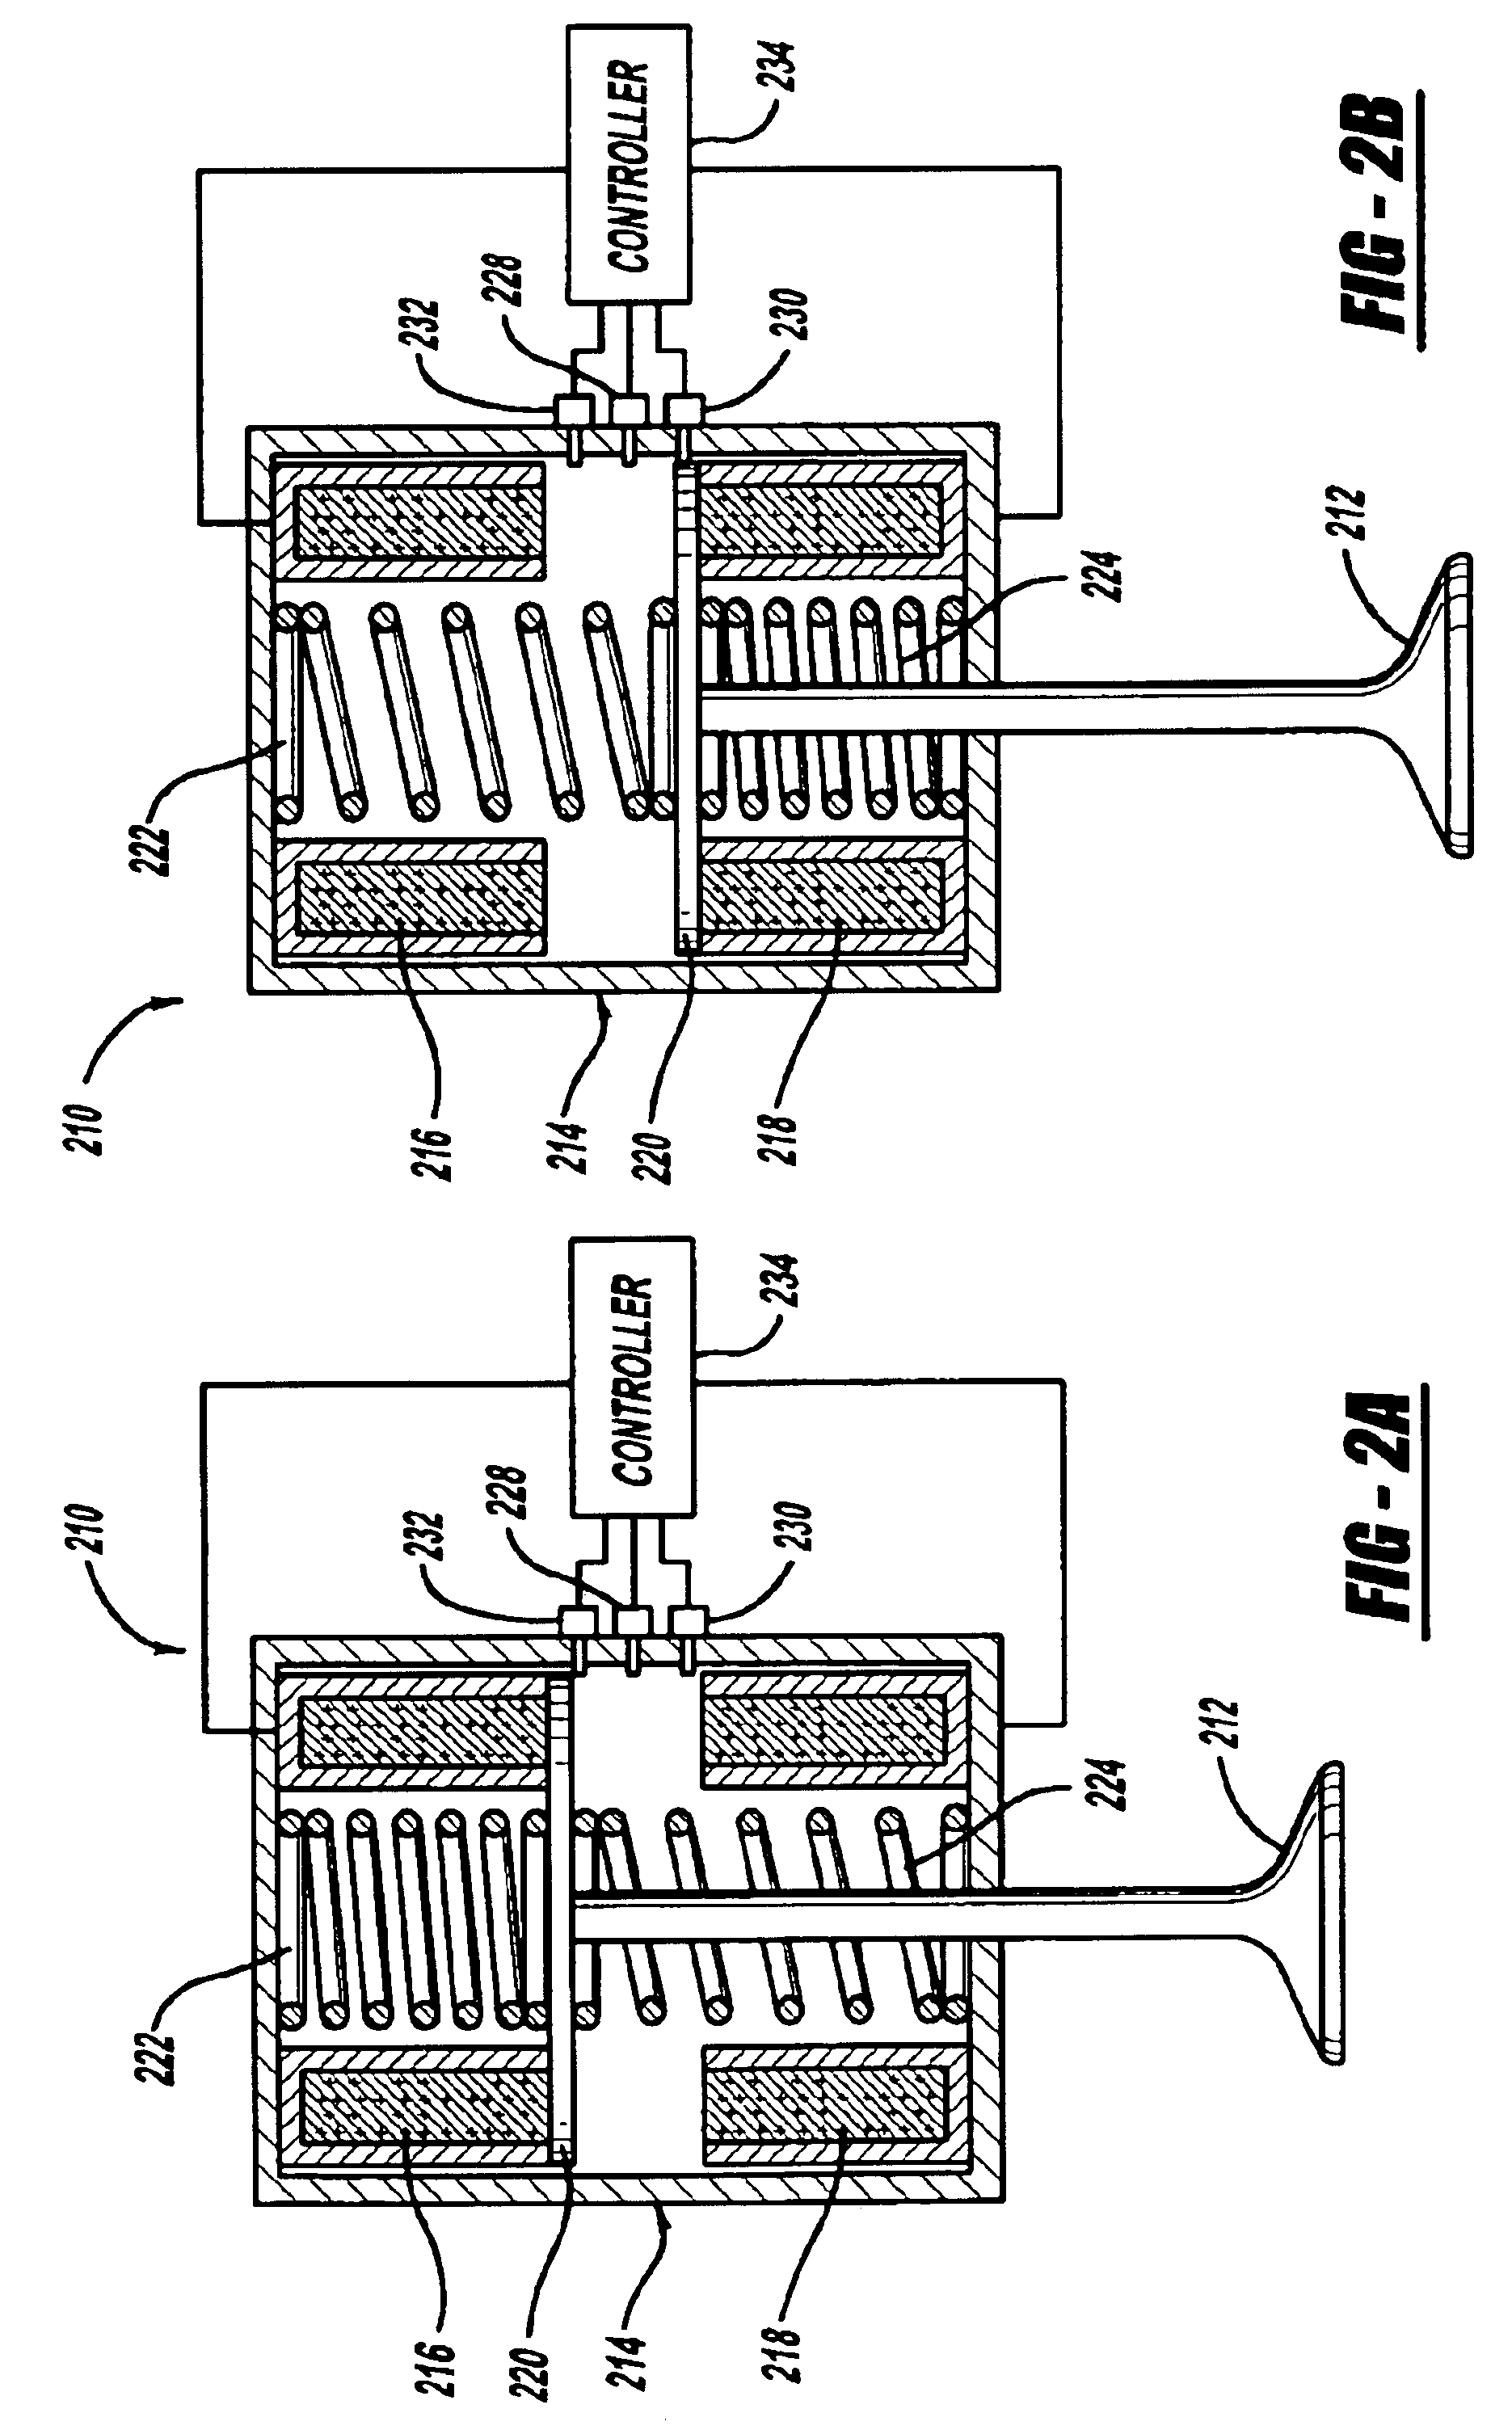 Computer controlled engine valve operation